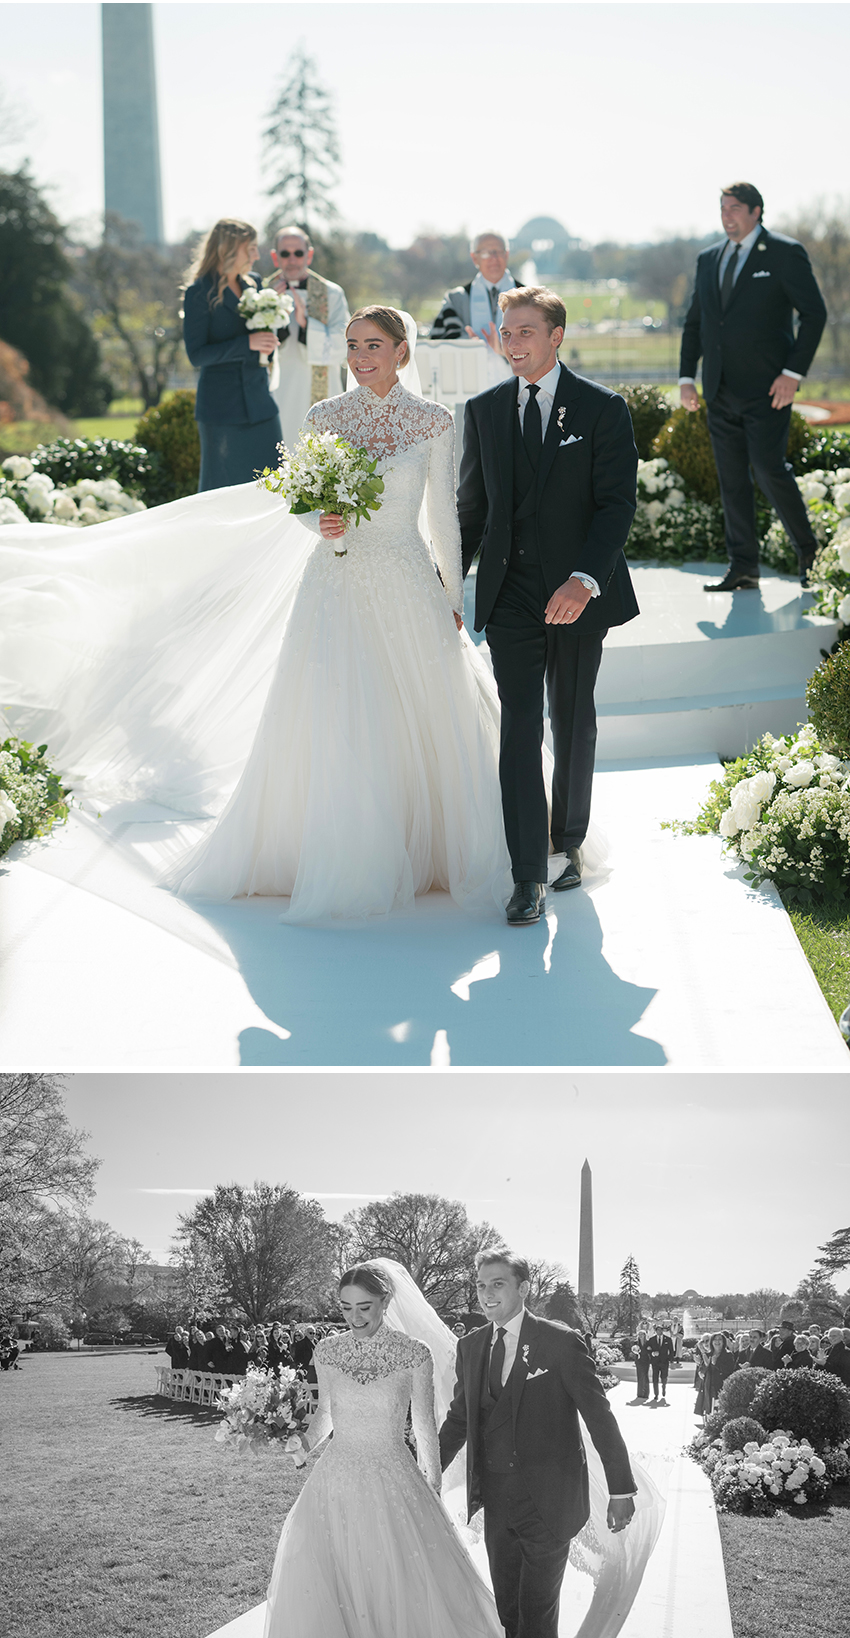 Naomi Biden marries Peter Neal at the White House